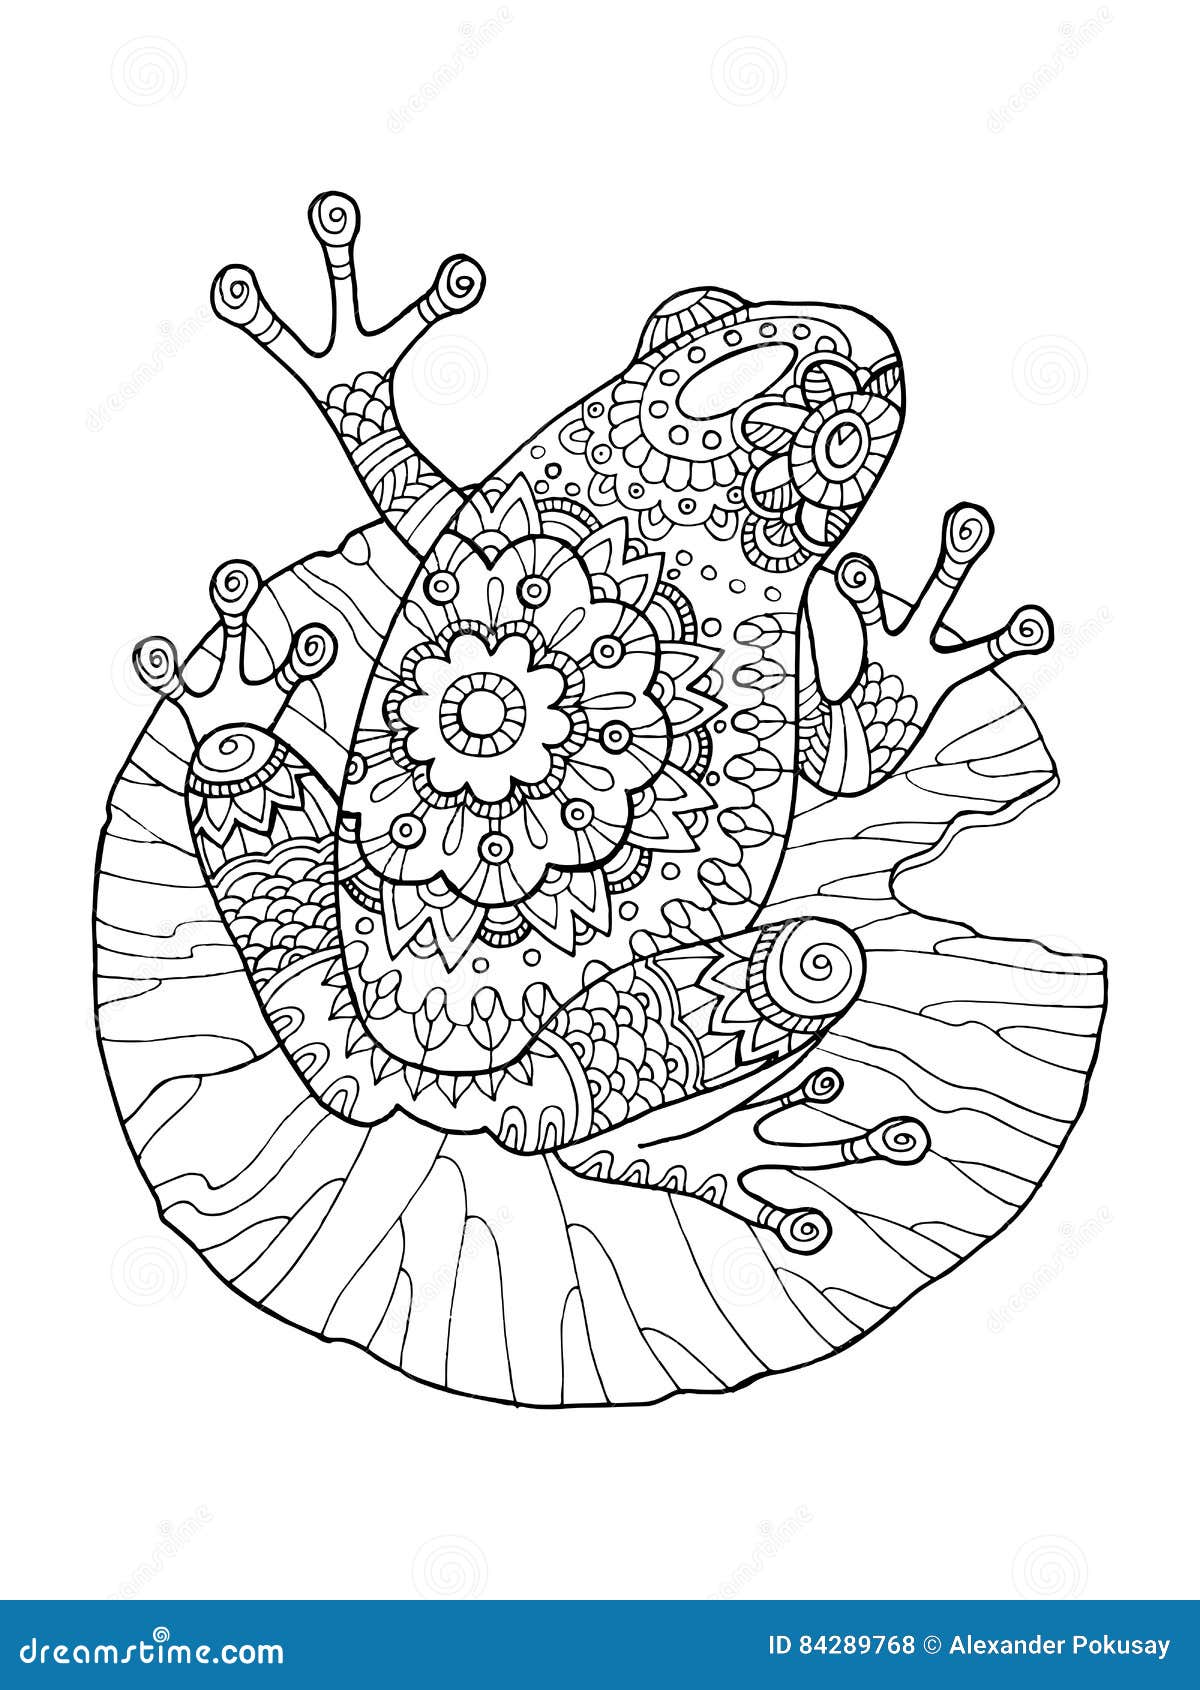 Frog coloring book vector illustration stock vector